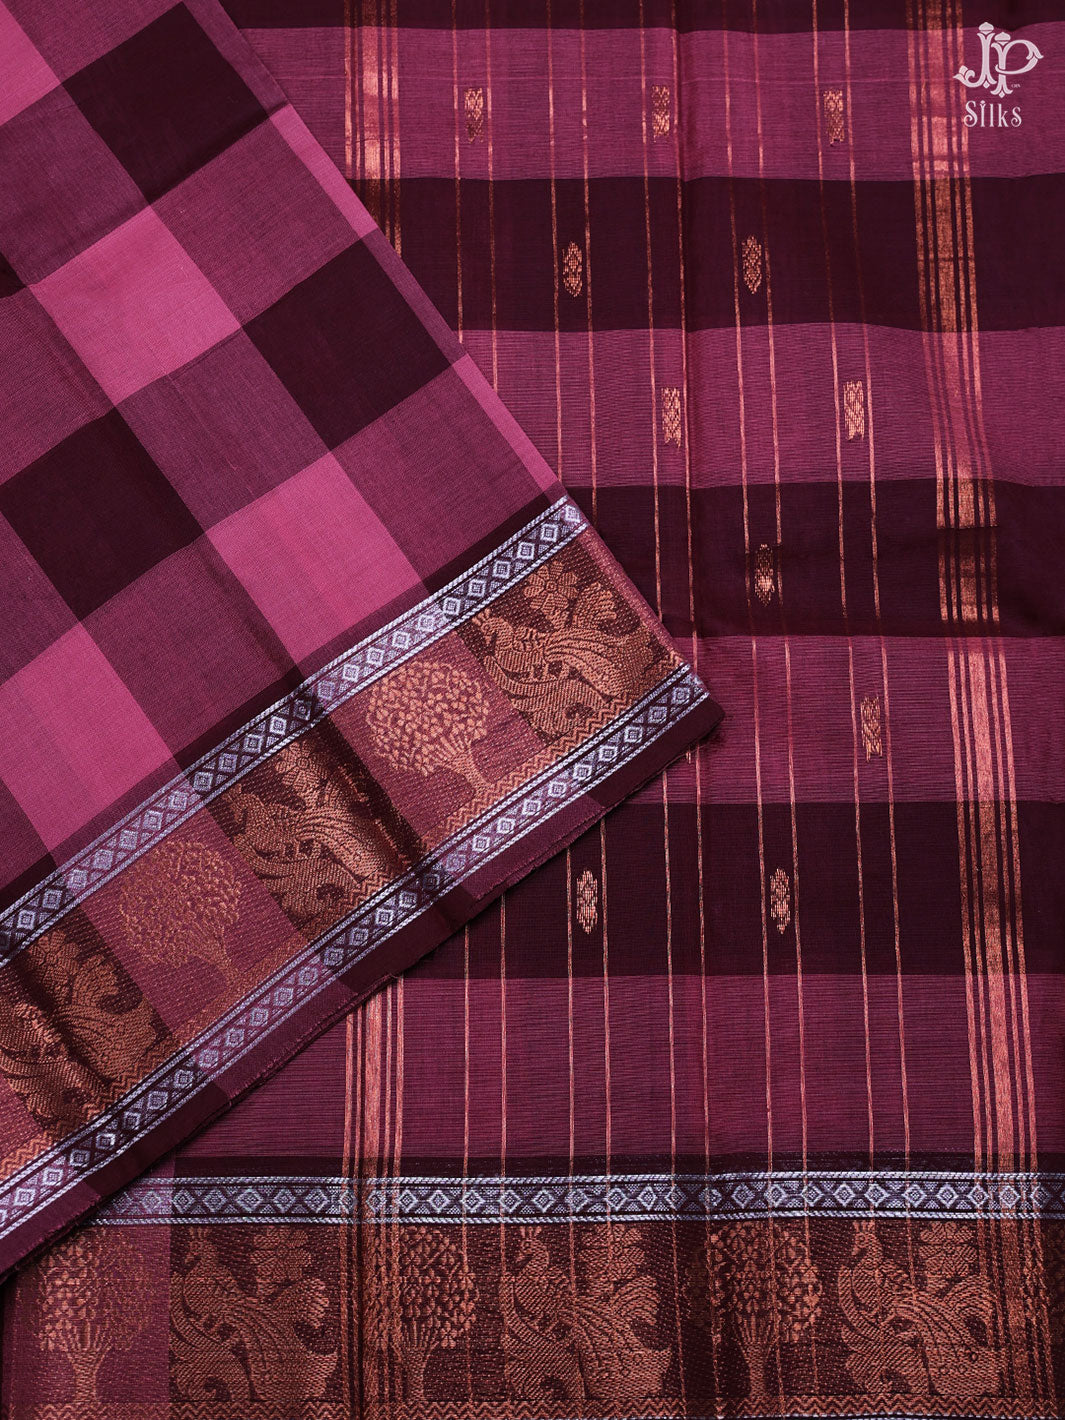 Pink and Maroon Cotton Saree - D2550 - View 4